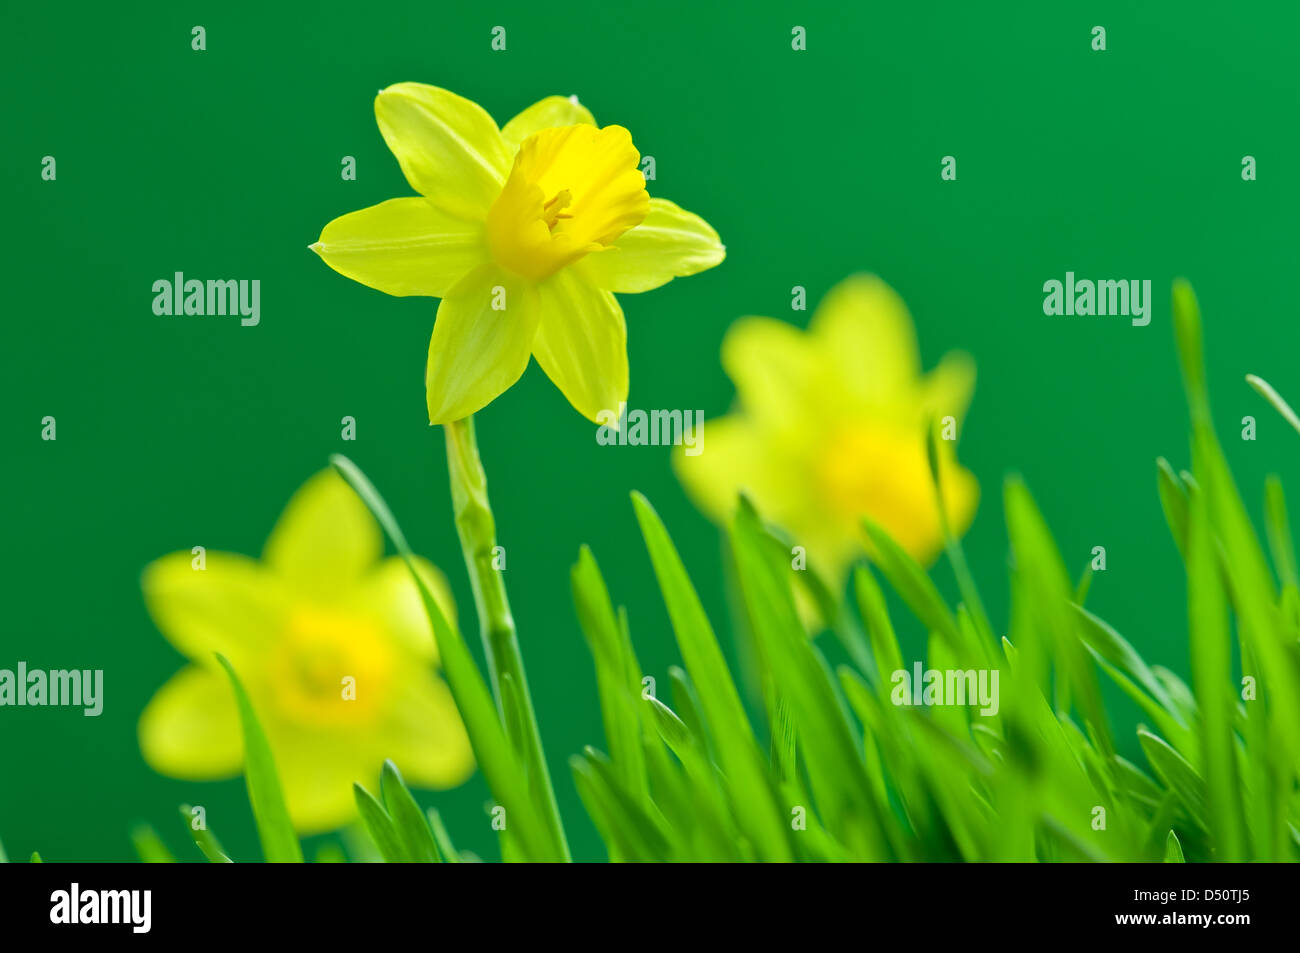 yellow narcissus on green background Stock Photo